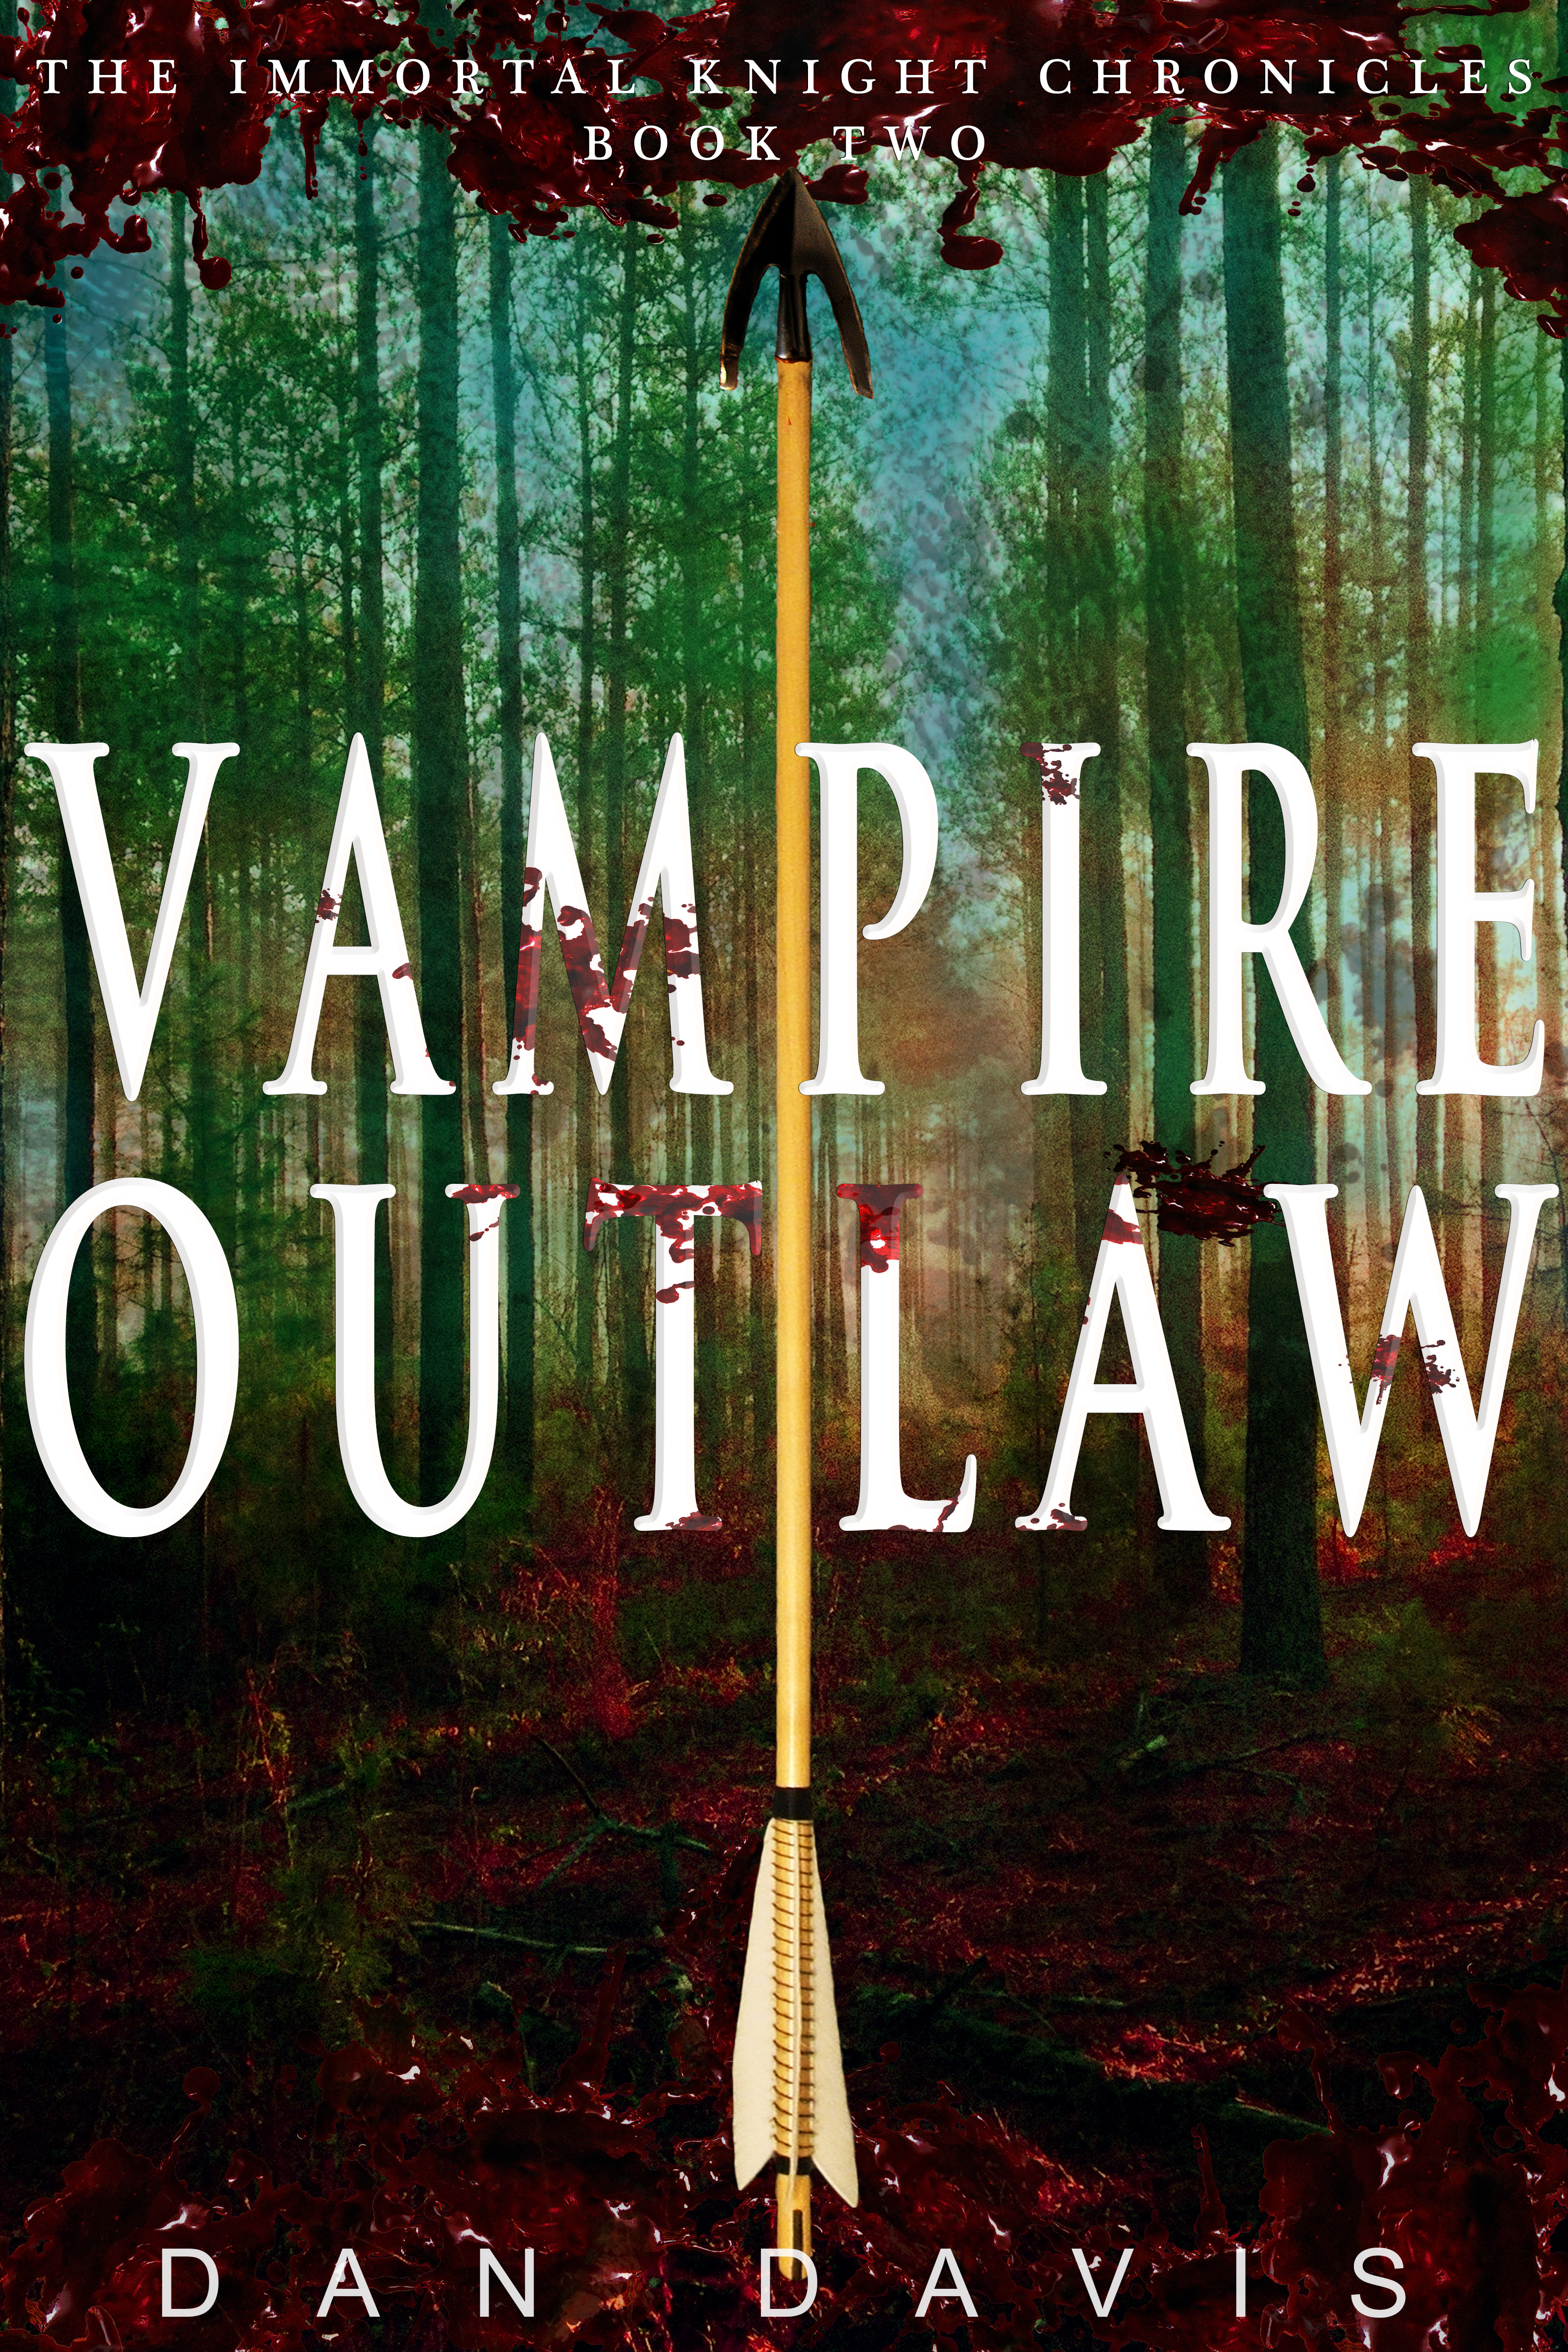 Cover Reveal for Vampire Outlaw: the Immortal Knight Chronicles Book 2